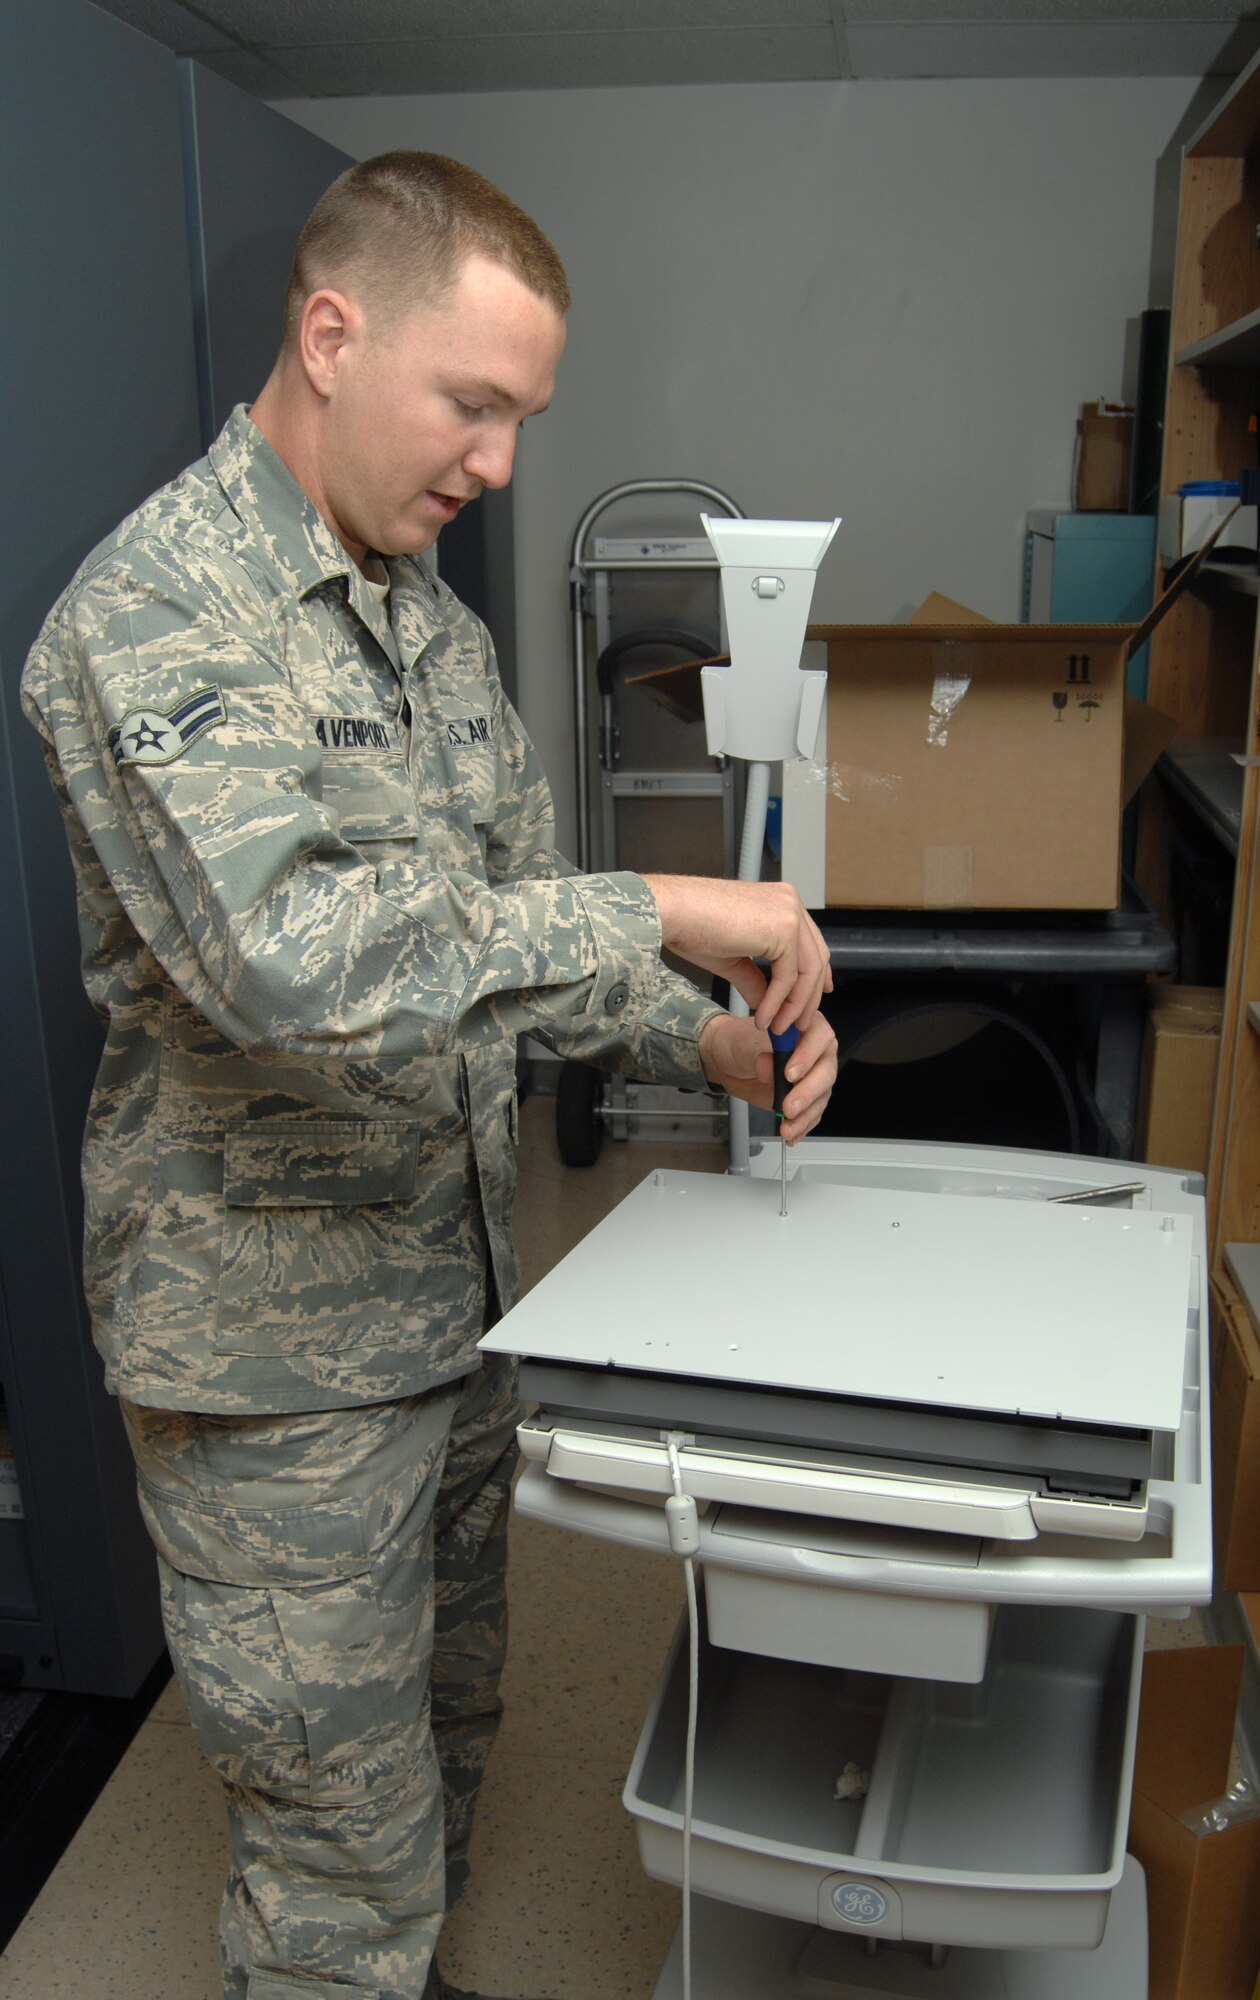 U.S. Air Force Airman 1st Class Austin Davenport, 355th Medical Support Squadron biomedical equipment technician, performs an initial inspection on an ECG machine at Davis-Monthan Air Force Base, Ariz, Nov. 27, 2012. Inspections must be done before the machine can go to the section it belongs to. (U.S. Air Force photo by Senior Airman Michael Washburn/Released)